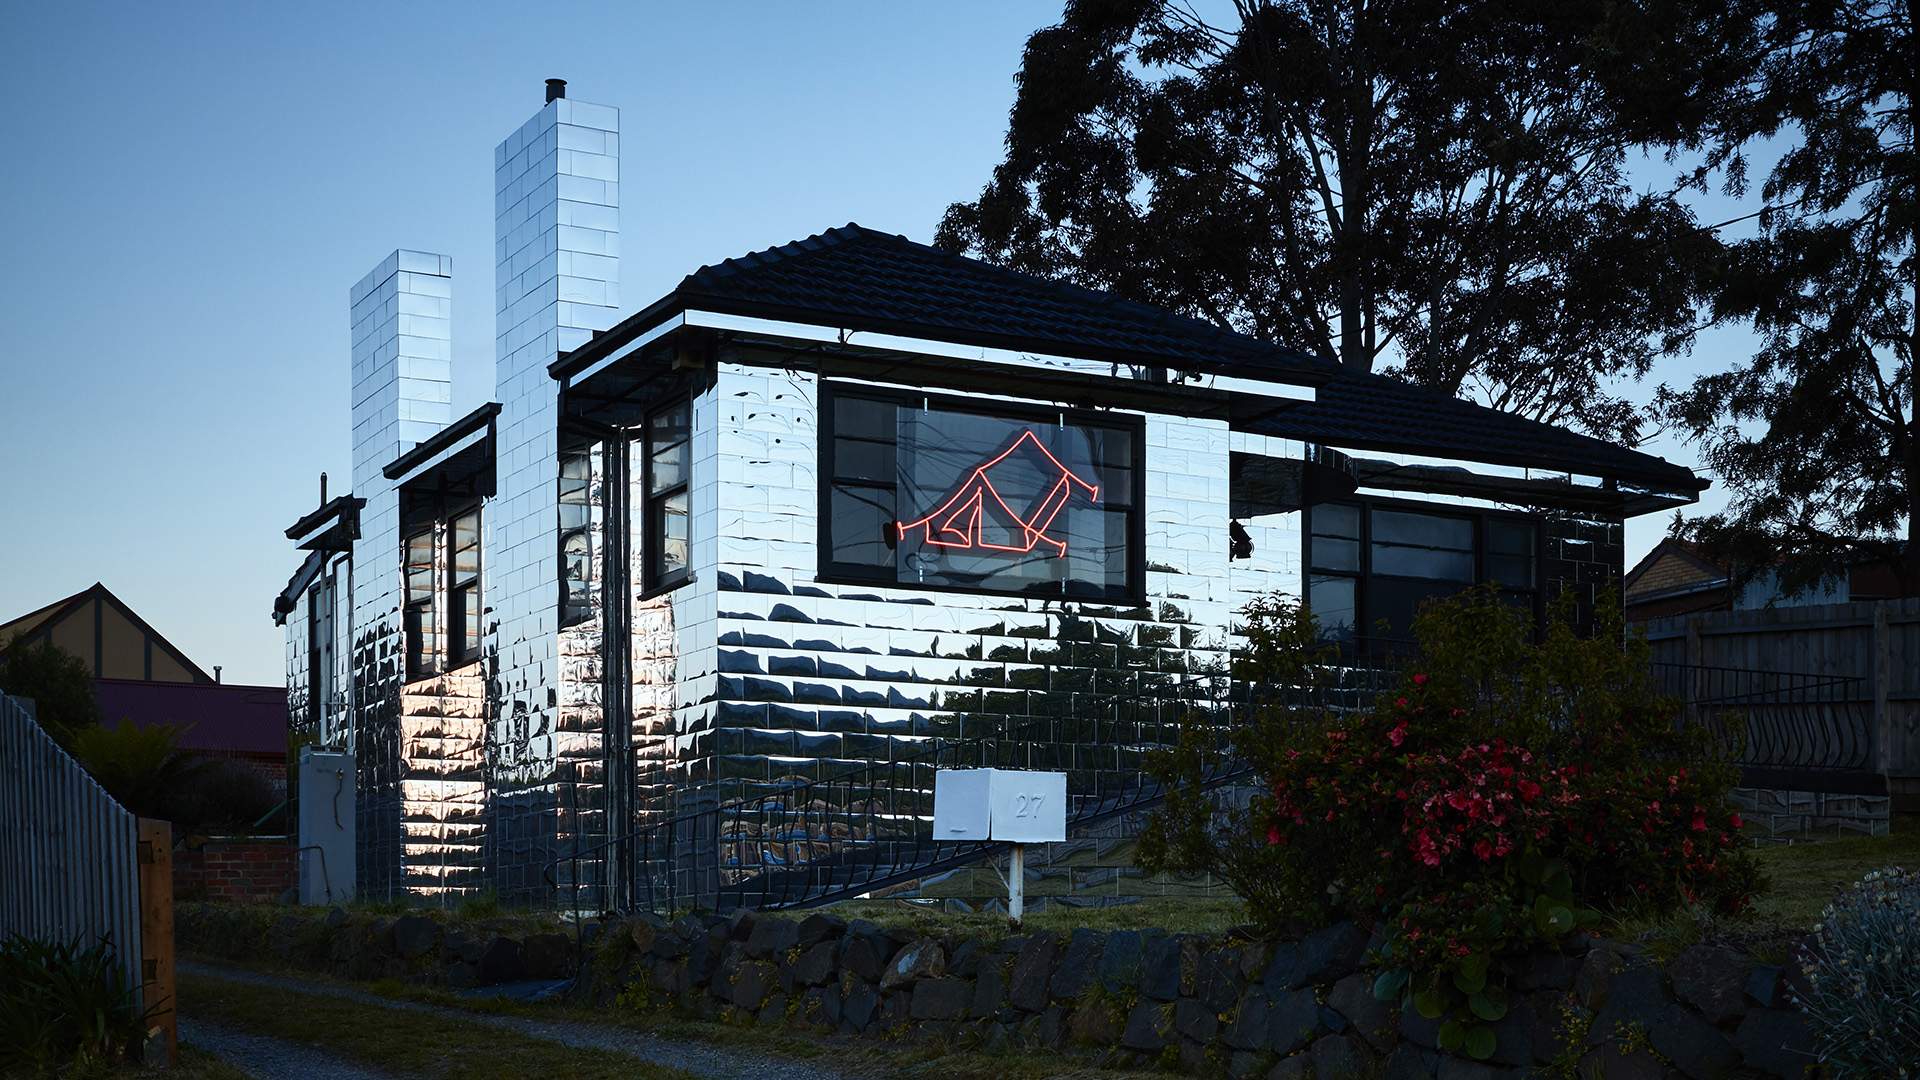 Artists Have Covered A Ferntree Gully House With Mirrors